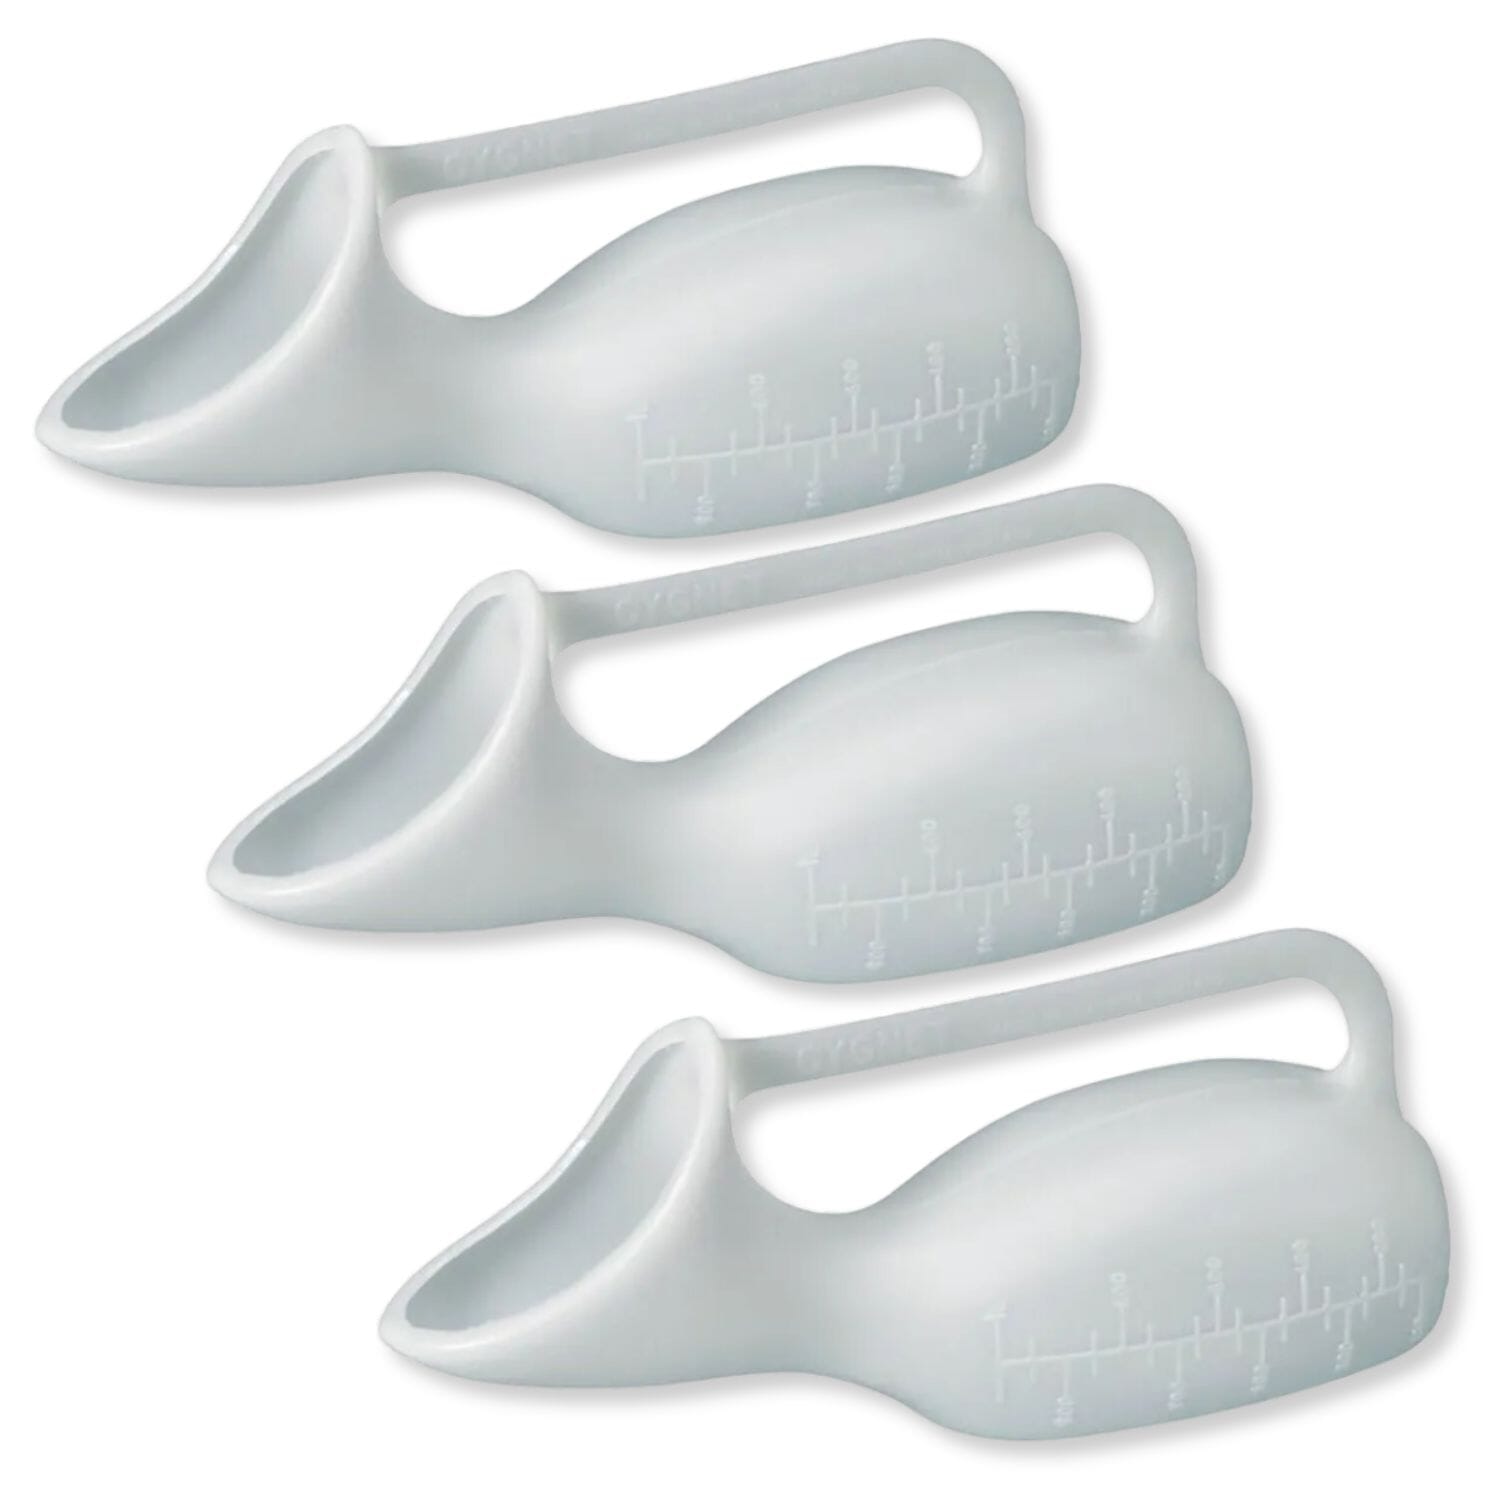 View Cygnet Portable Female Urinal Pack of 3 information